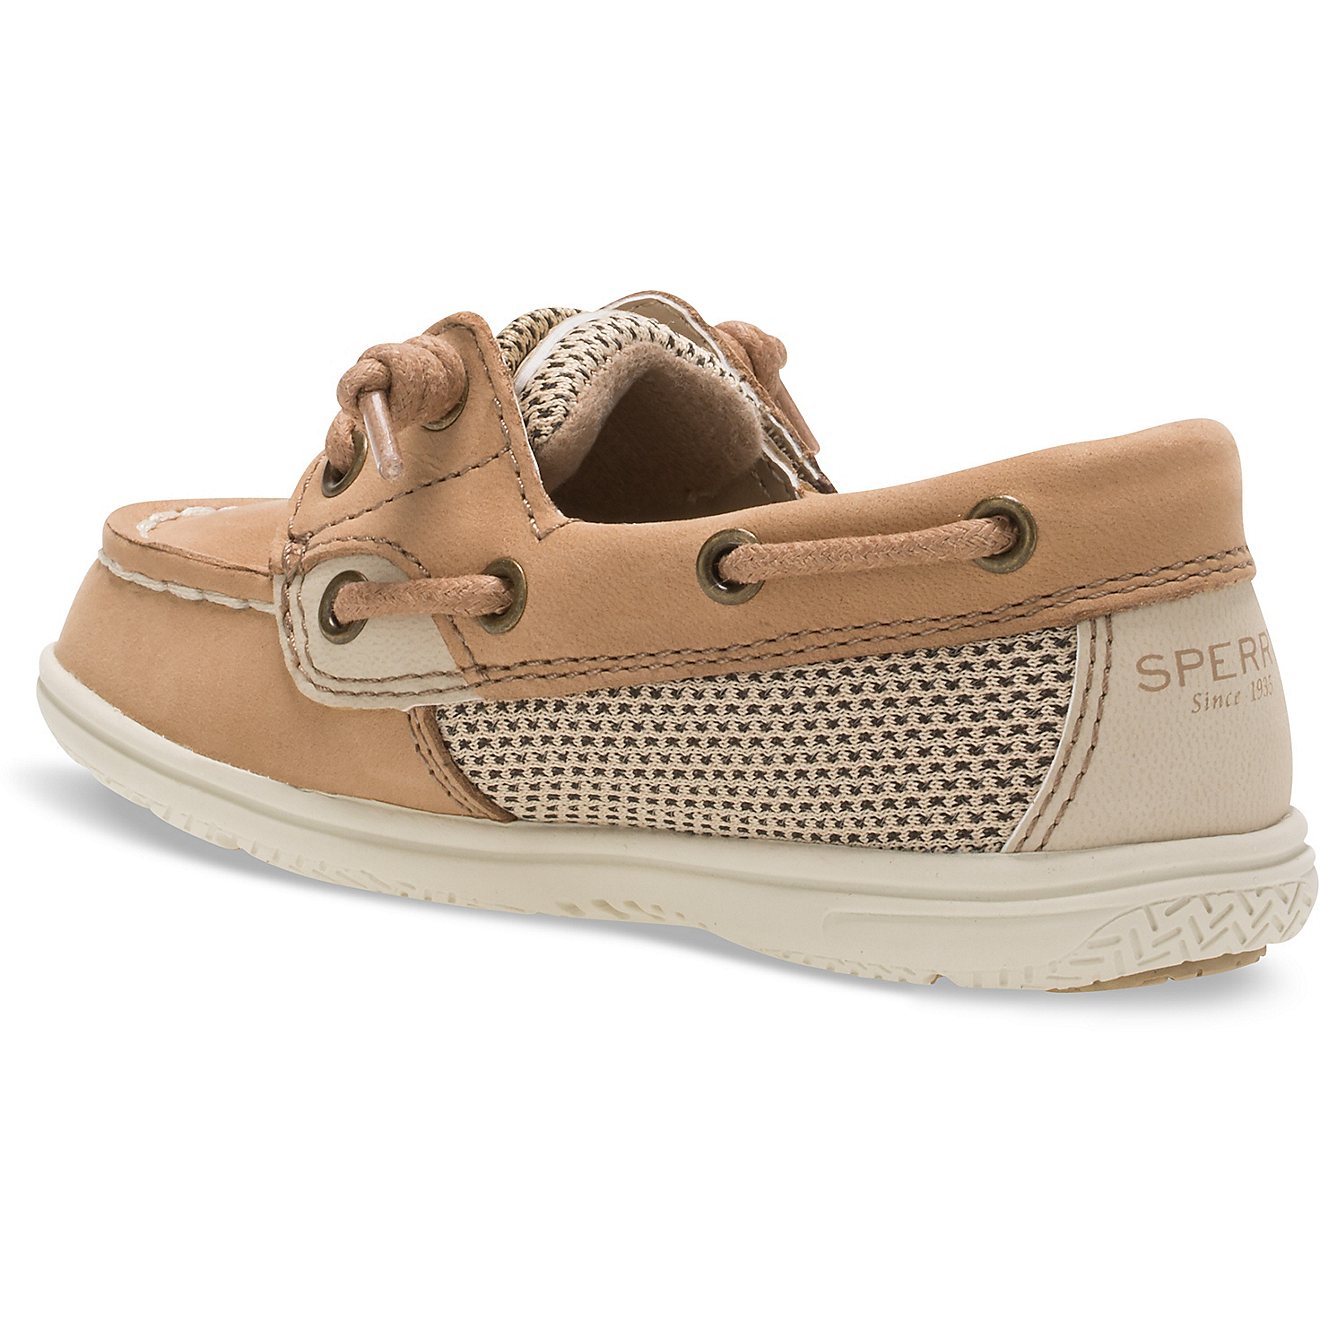 Sperry Toddler Girls' Shoresider Jr Boat Shoes                                                                                   - view number 3